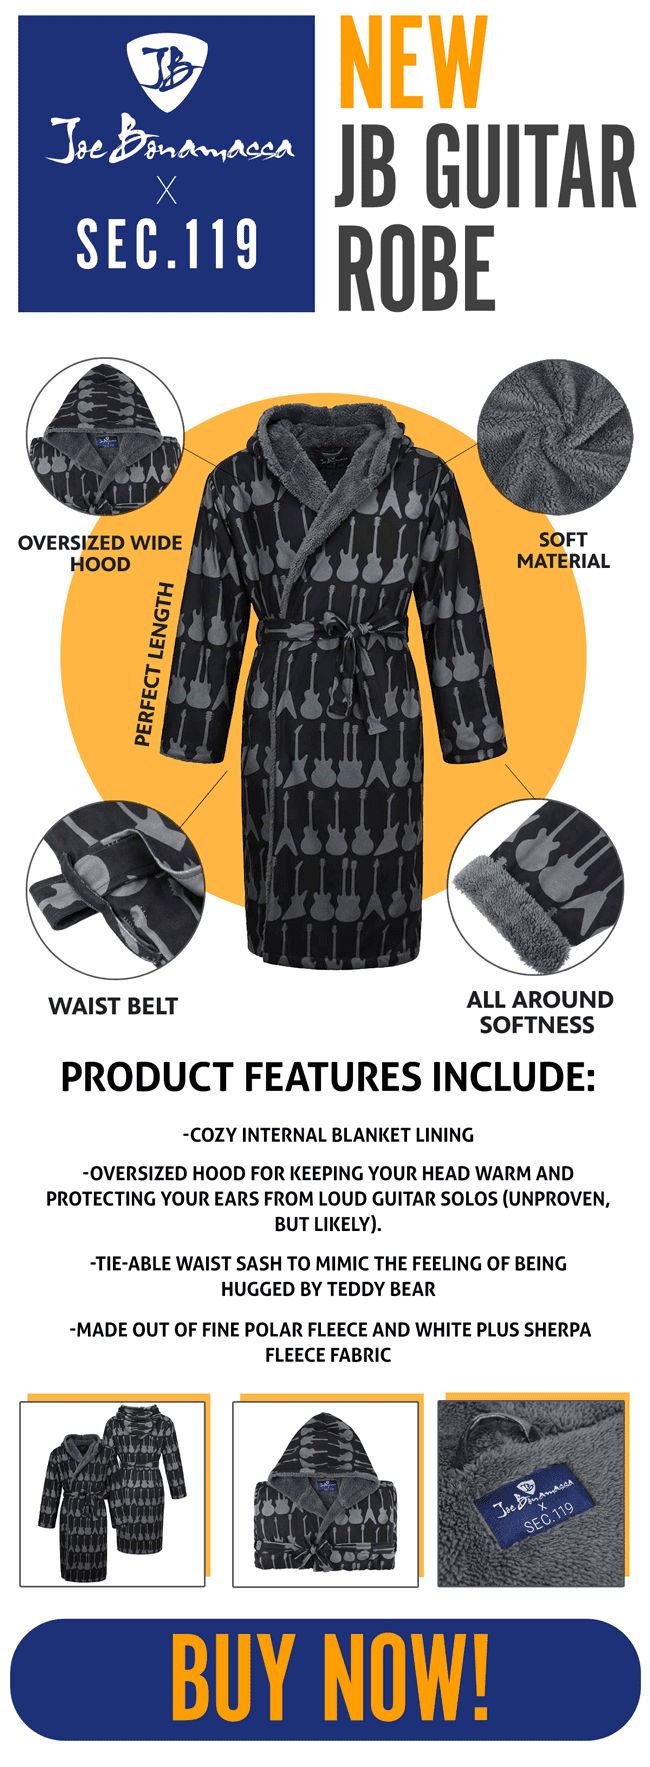 Cozy, warm and large - the JB Guitar Robe!